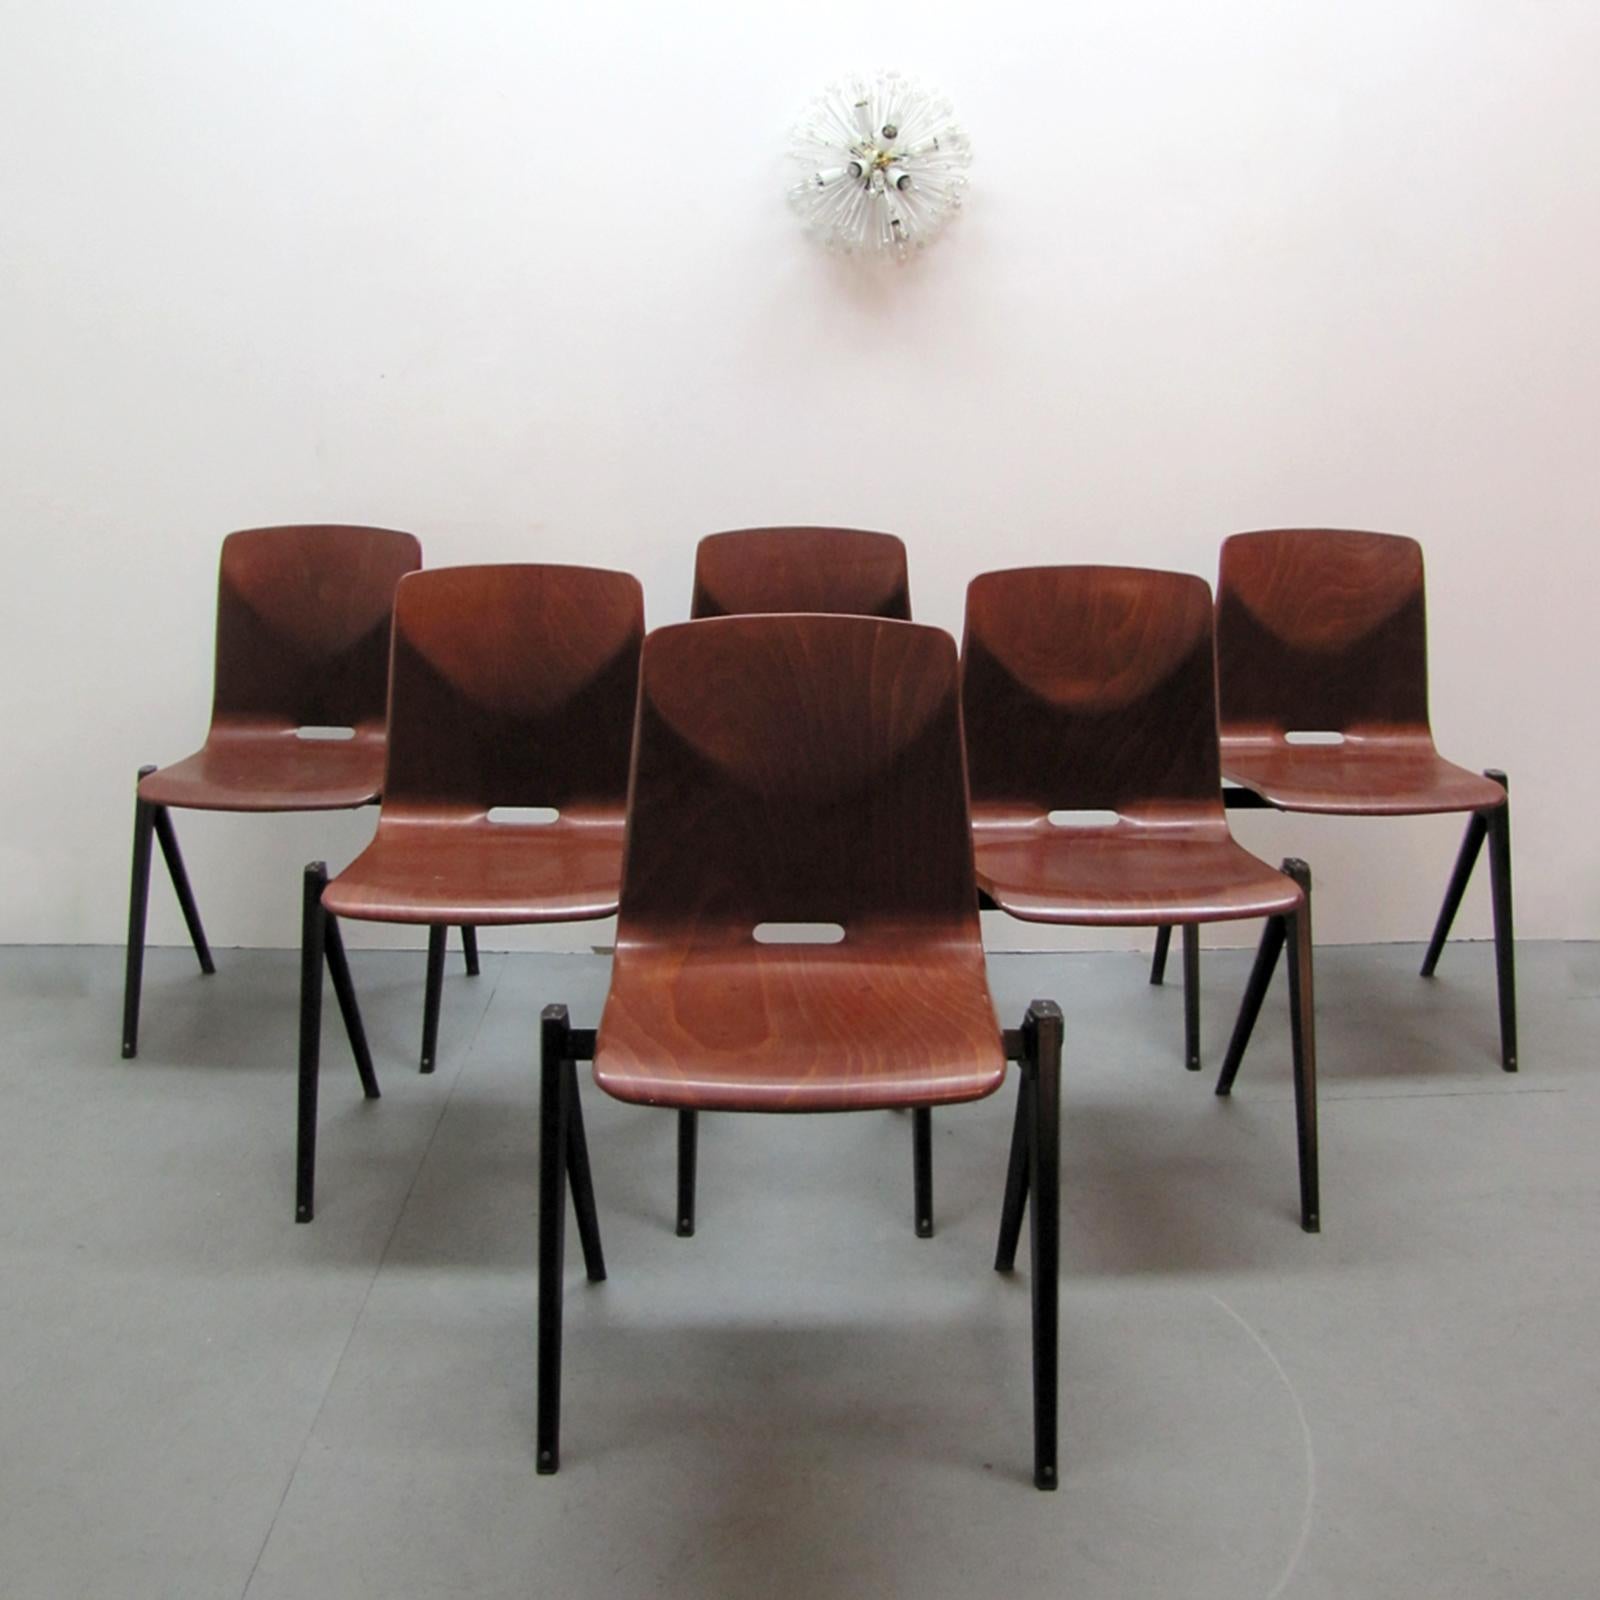 Six Industrial Dining Chairs by Galvanitas, 1960 For Sale 2